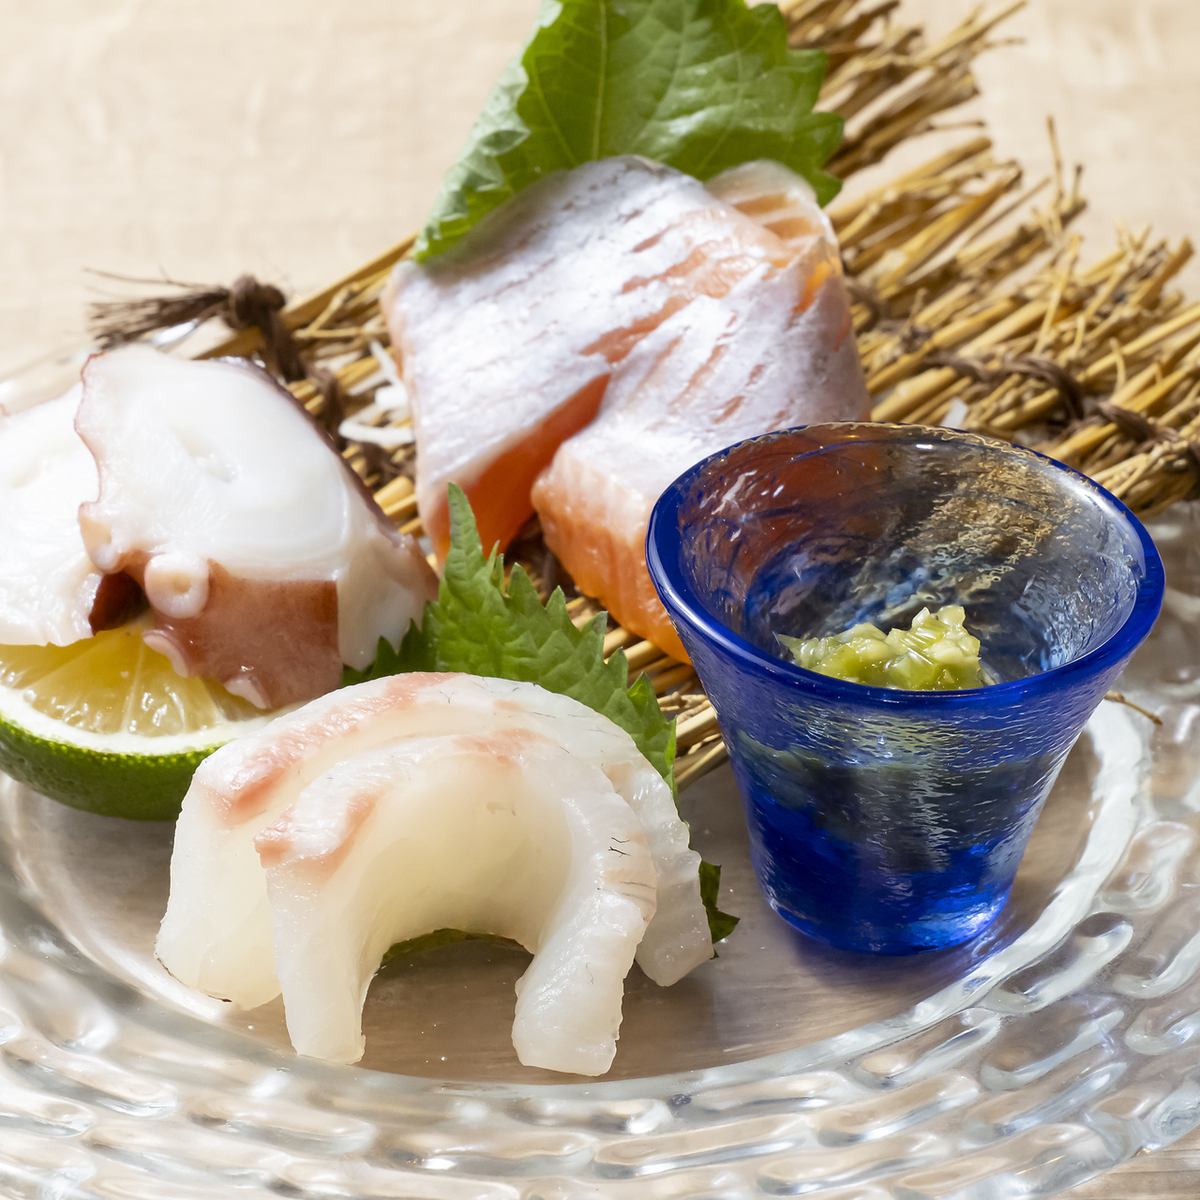 It's not just tempura! You'll also enjoy the owner's special seafood!